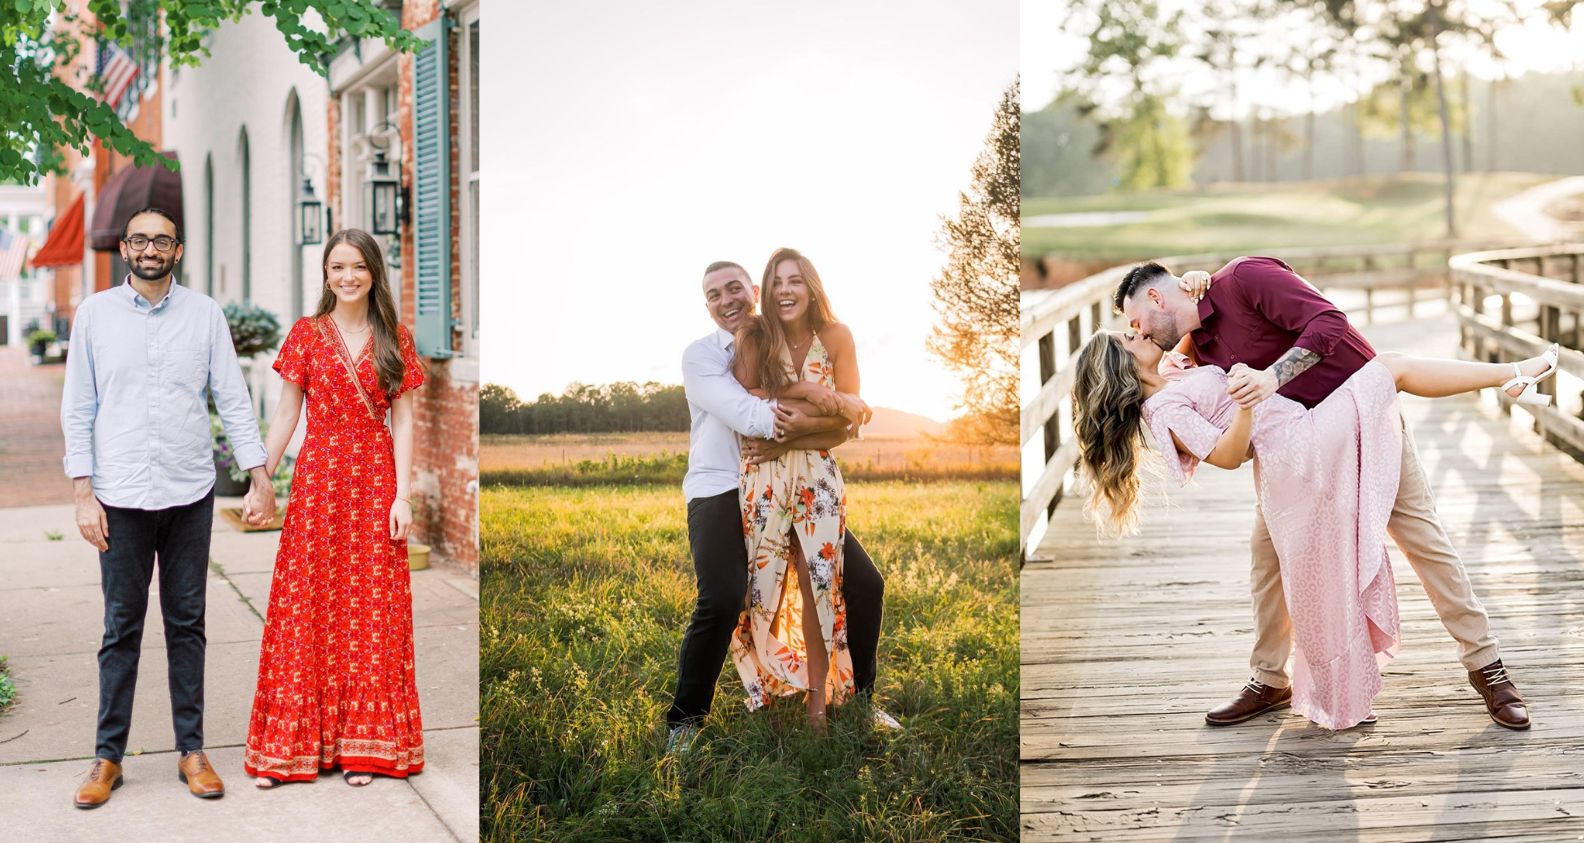 Summer Engagement Photo Outfits and summer engagement photo ideas